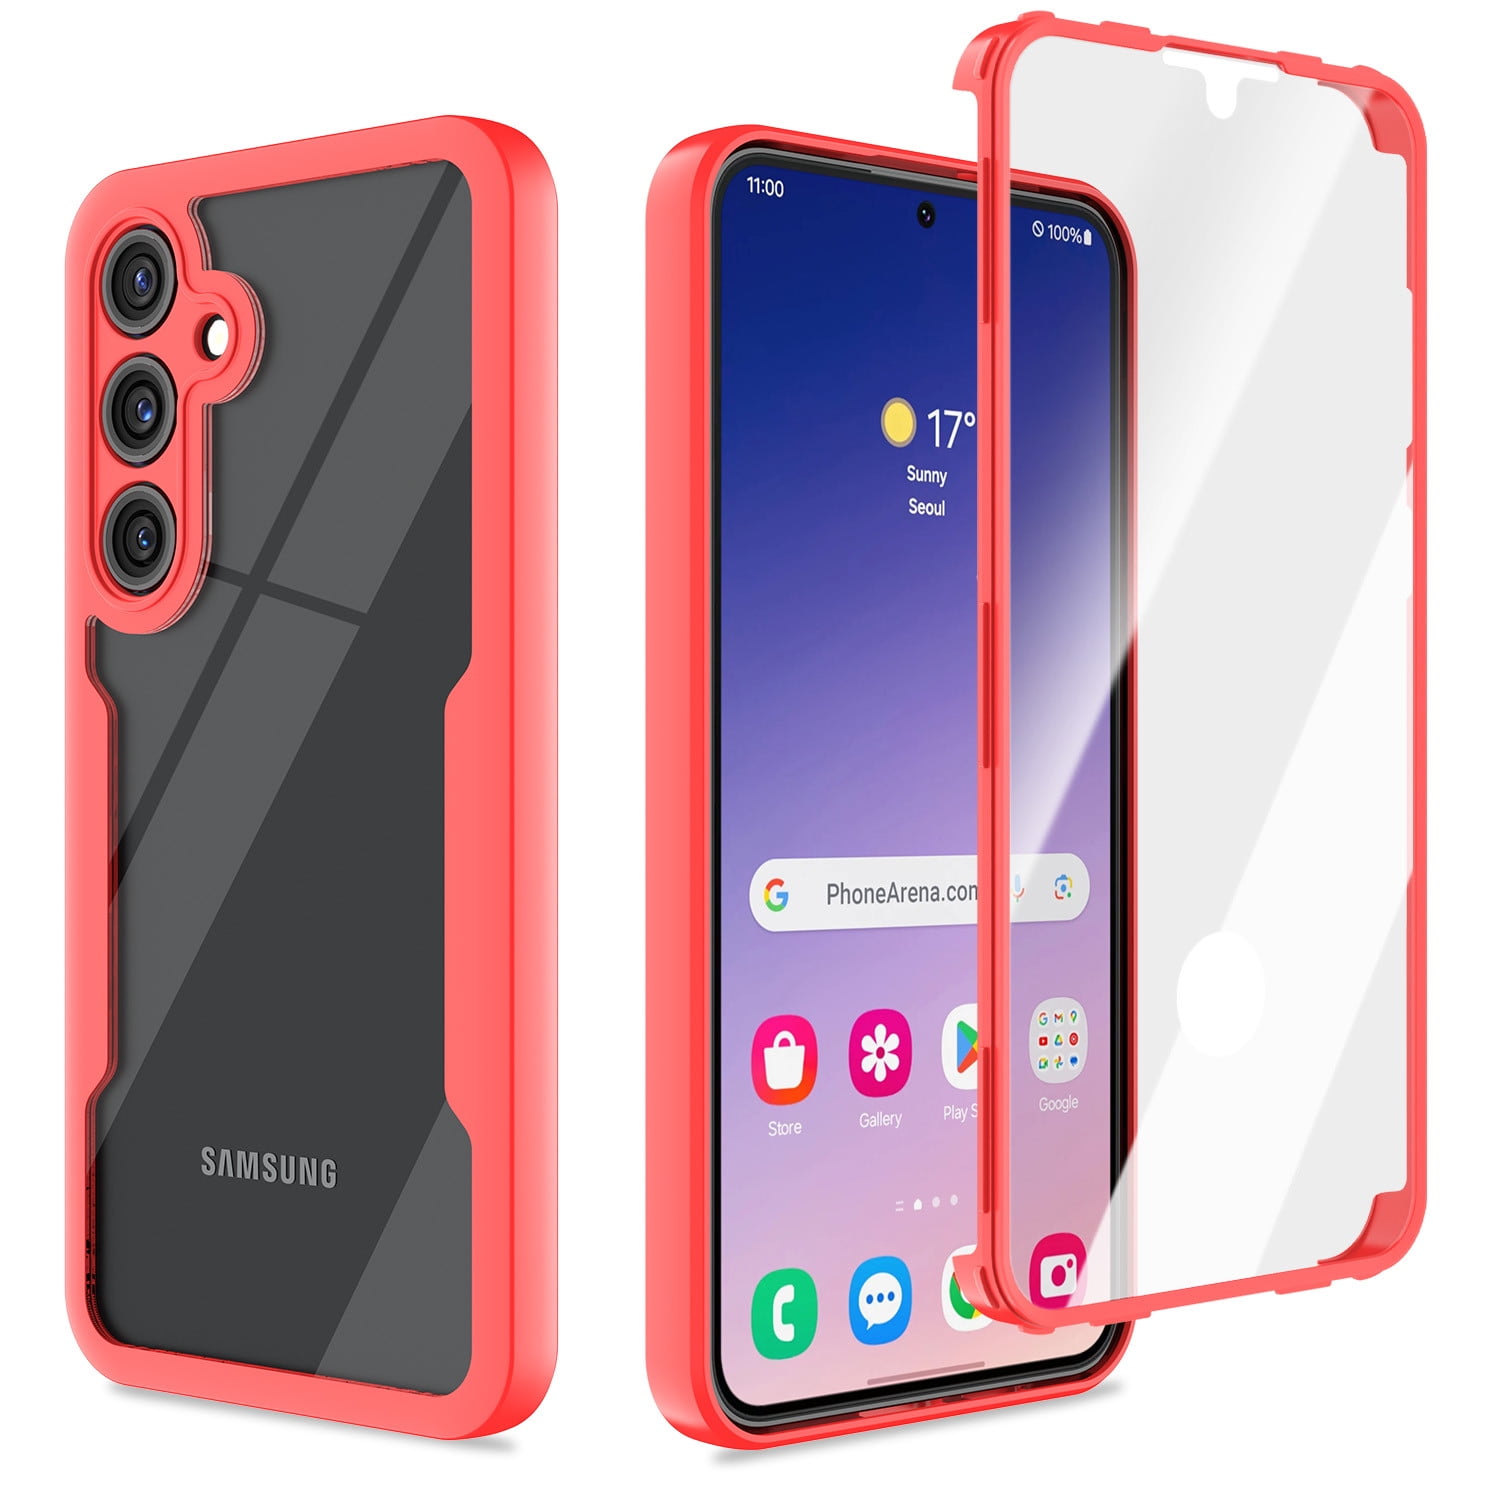 Elegant Choise Case with 2Pcs Screen Protector with Built-in